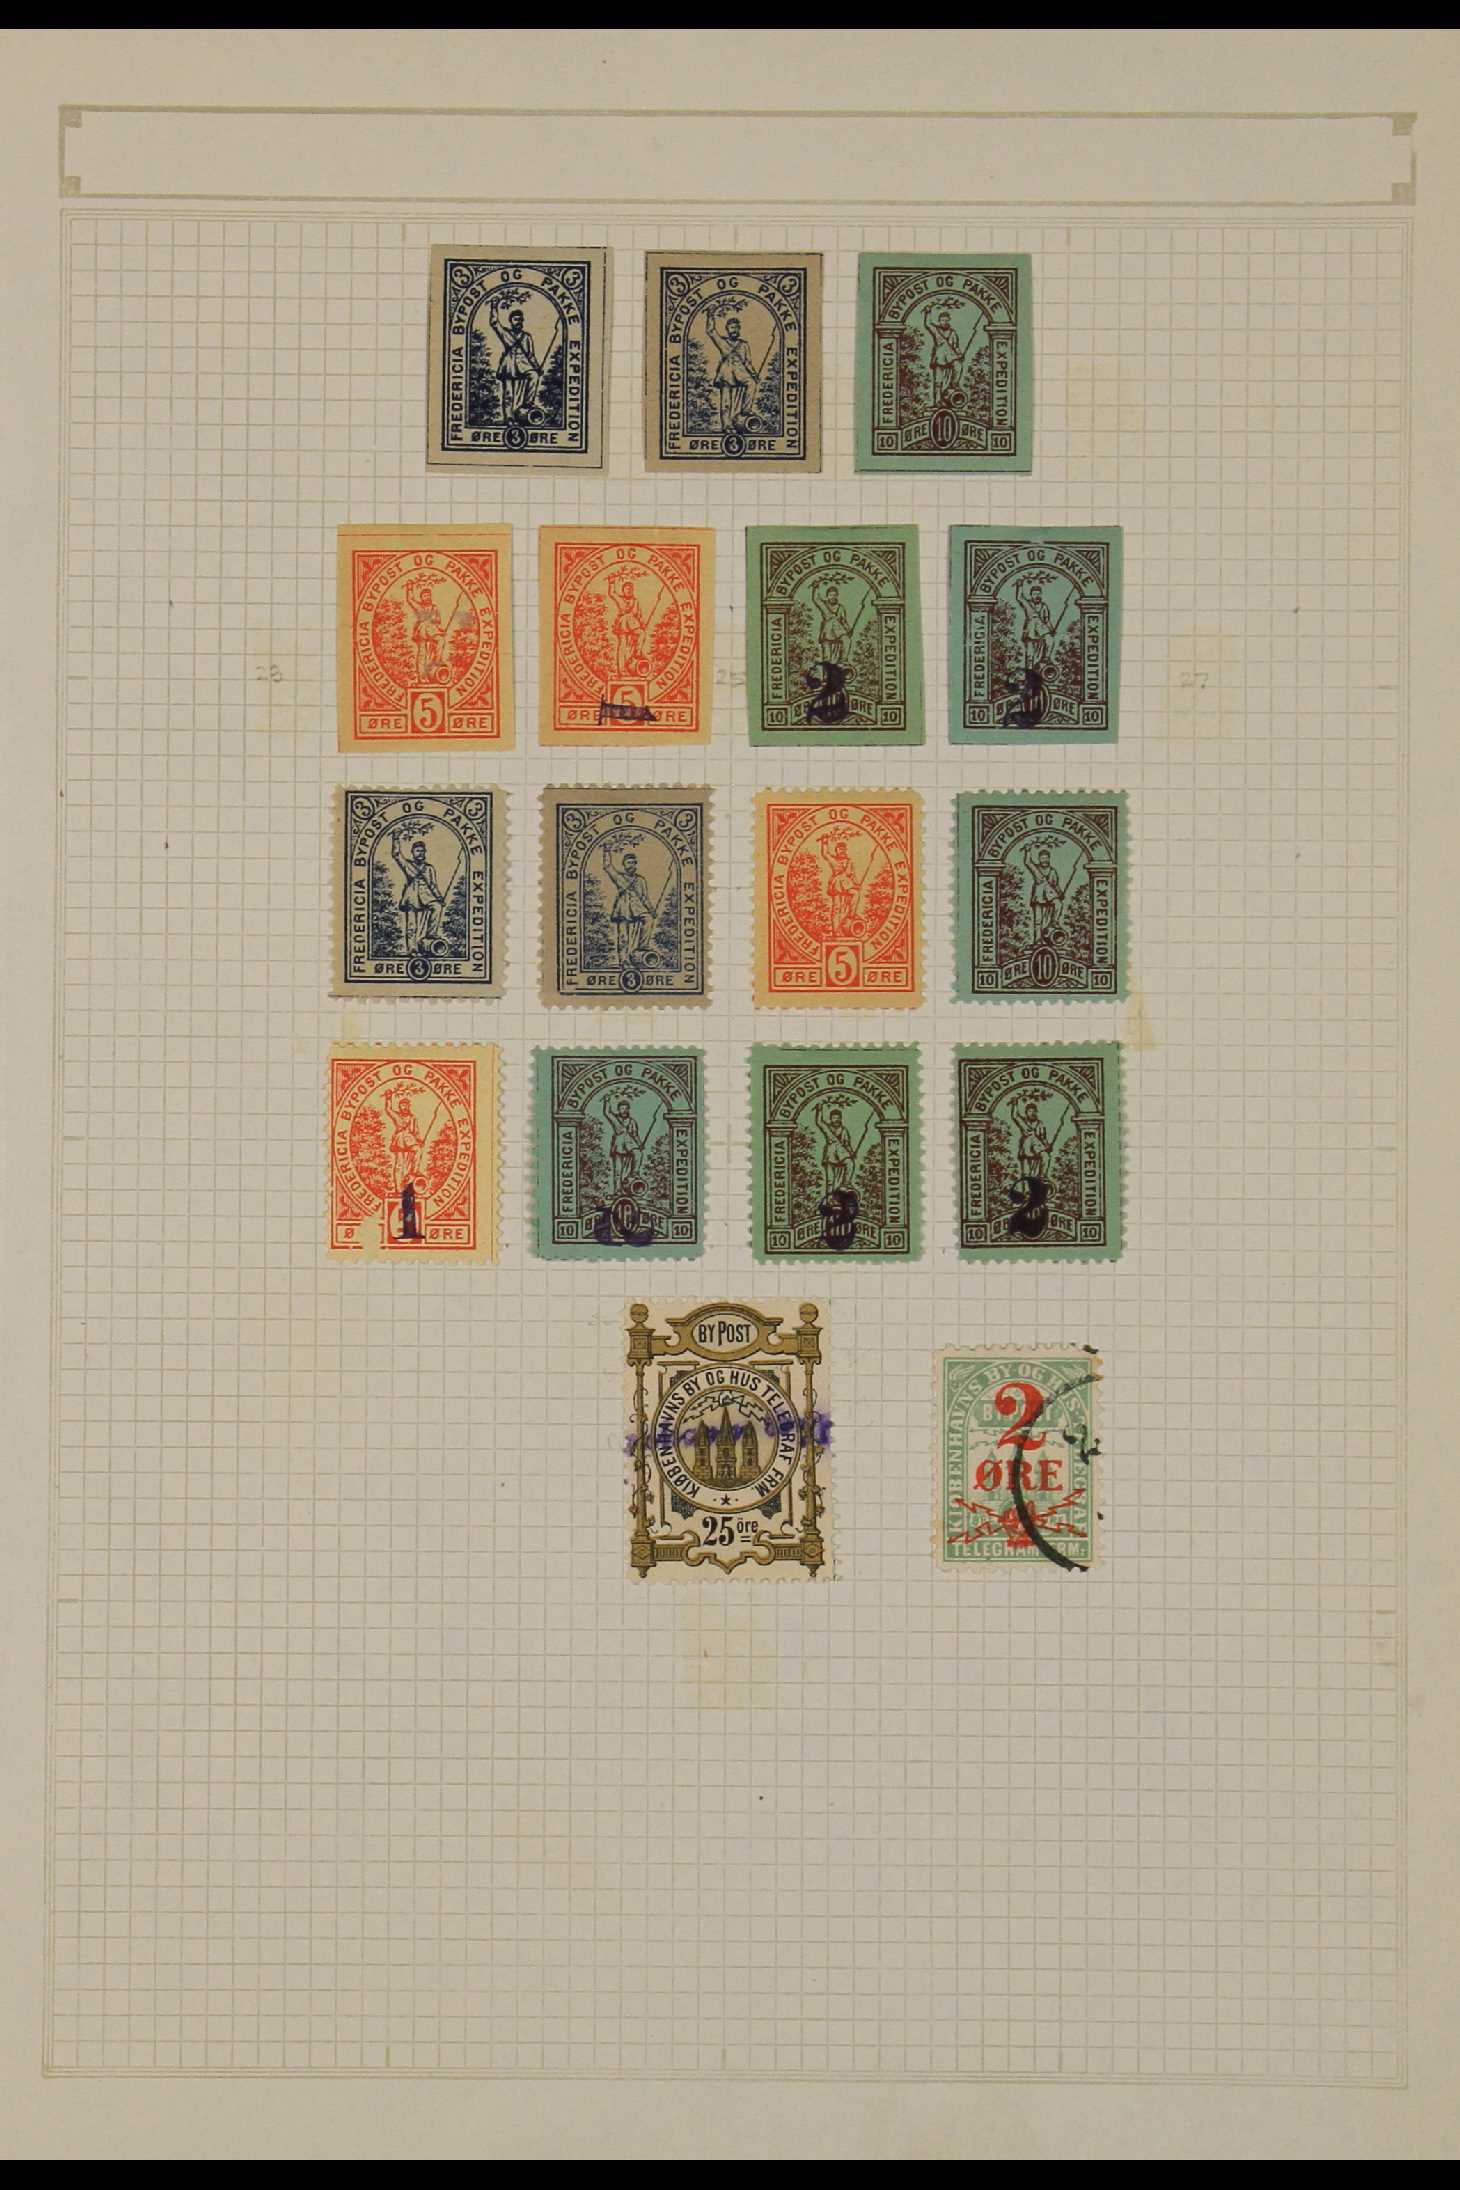 DENMARK LOCAL POST STAMPS - FREDERICIA 1888-1890 mint collection with imperfs, perfs and rouletted - Image 2 of 2